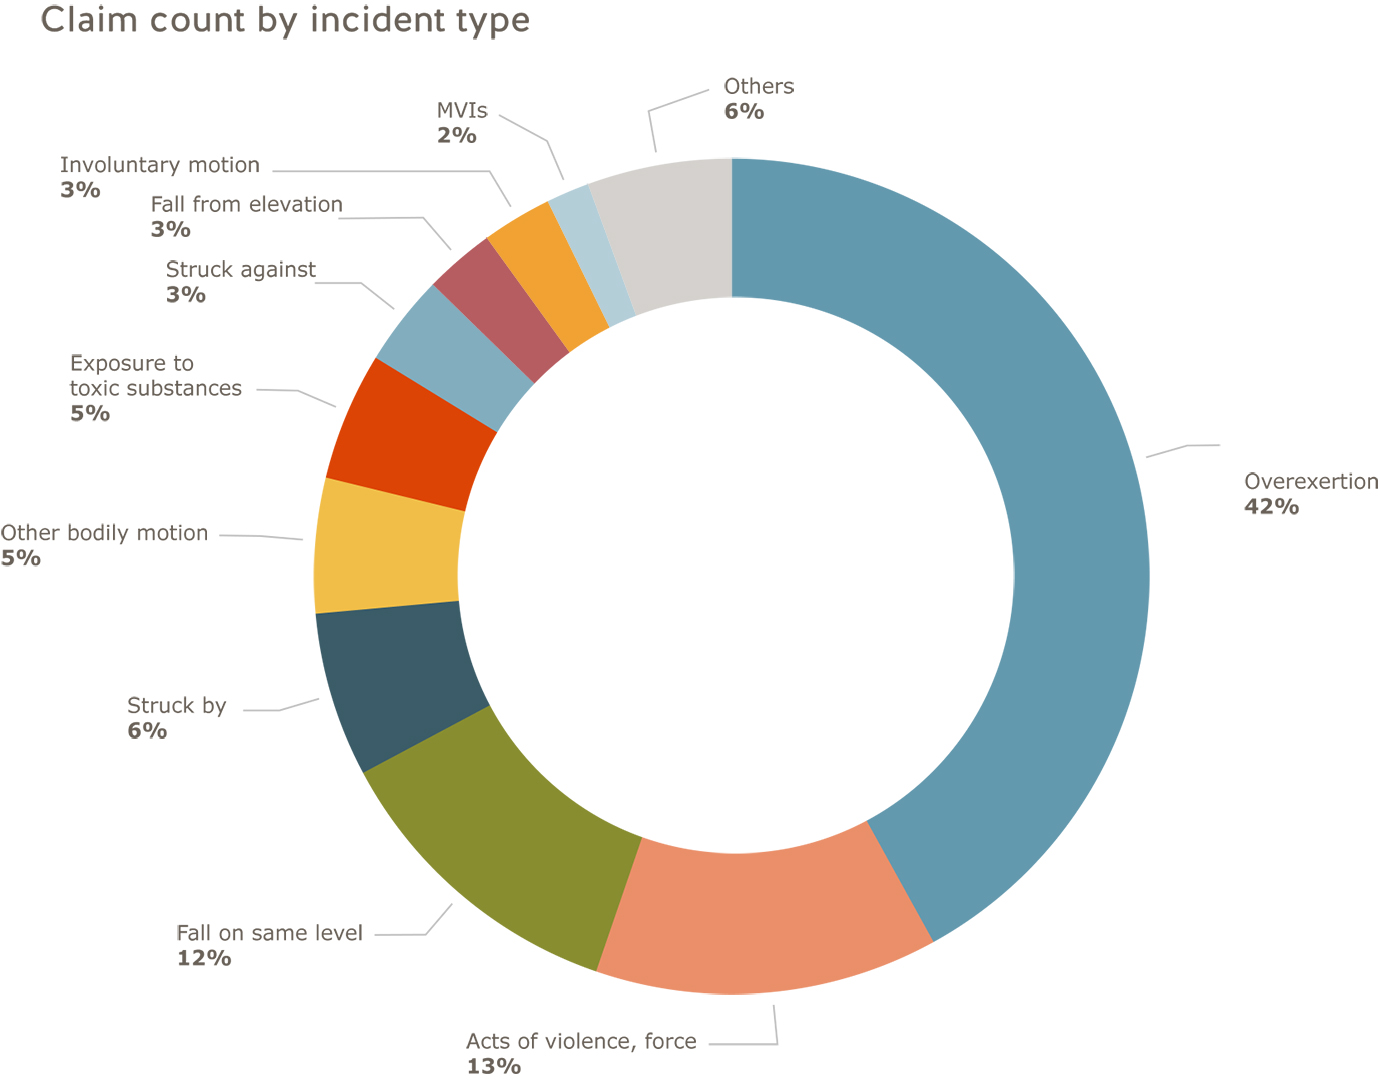 Health care and social services claim count by incident type: overexertion=42%; acts of violence, force=13%; fall on same level=12%; struck by=6%; other bodily motion=5%; exposure to toxic substances=5%; struck against=3%; fall from elevation=3%; involuntary  motion=3%; MVIs=2%; others=6%